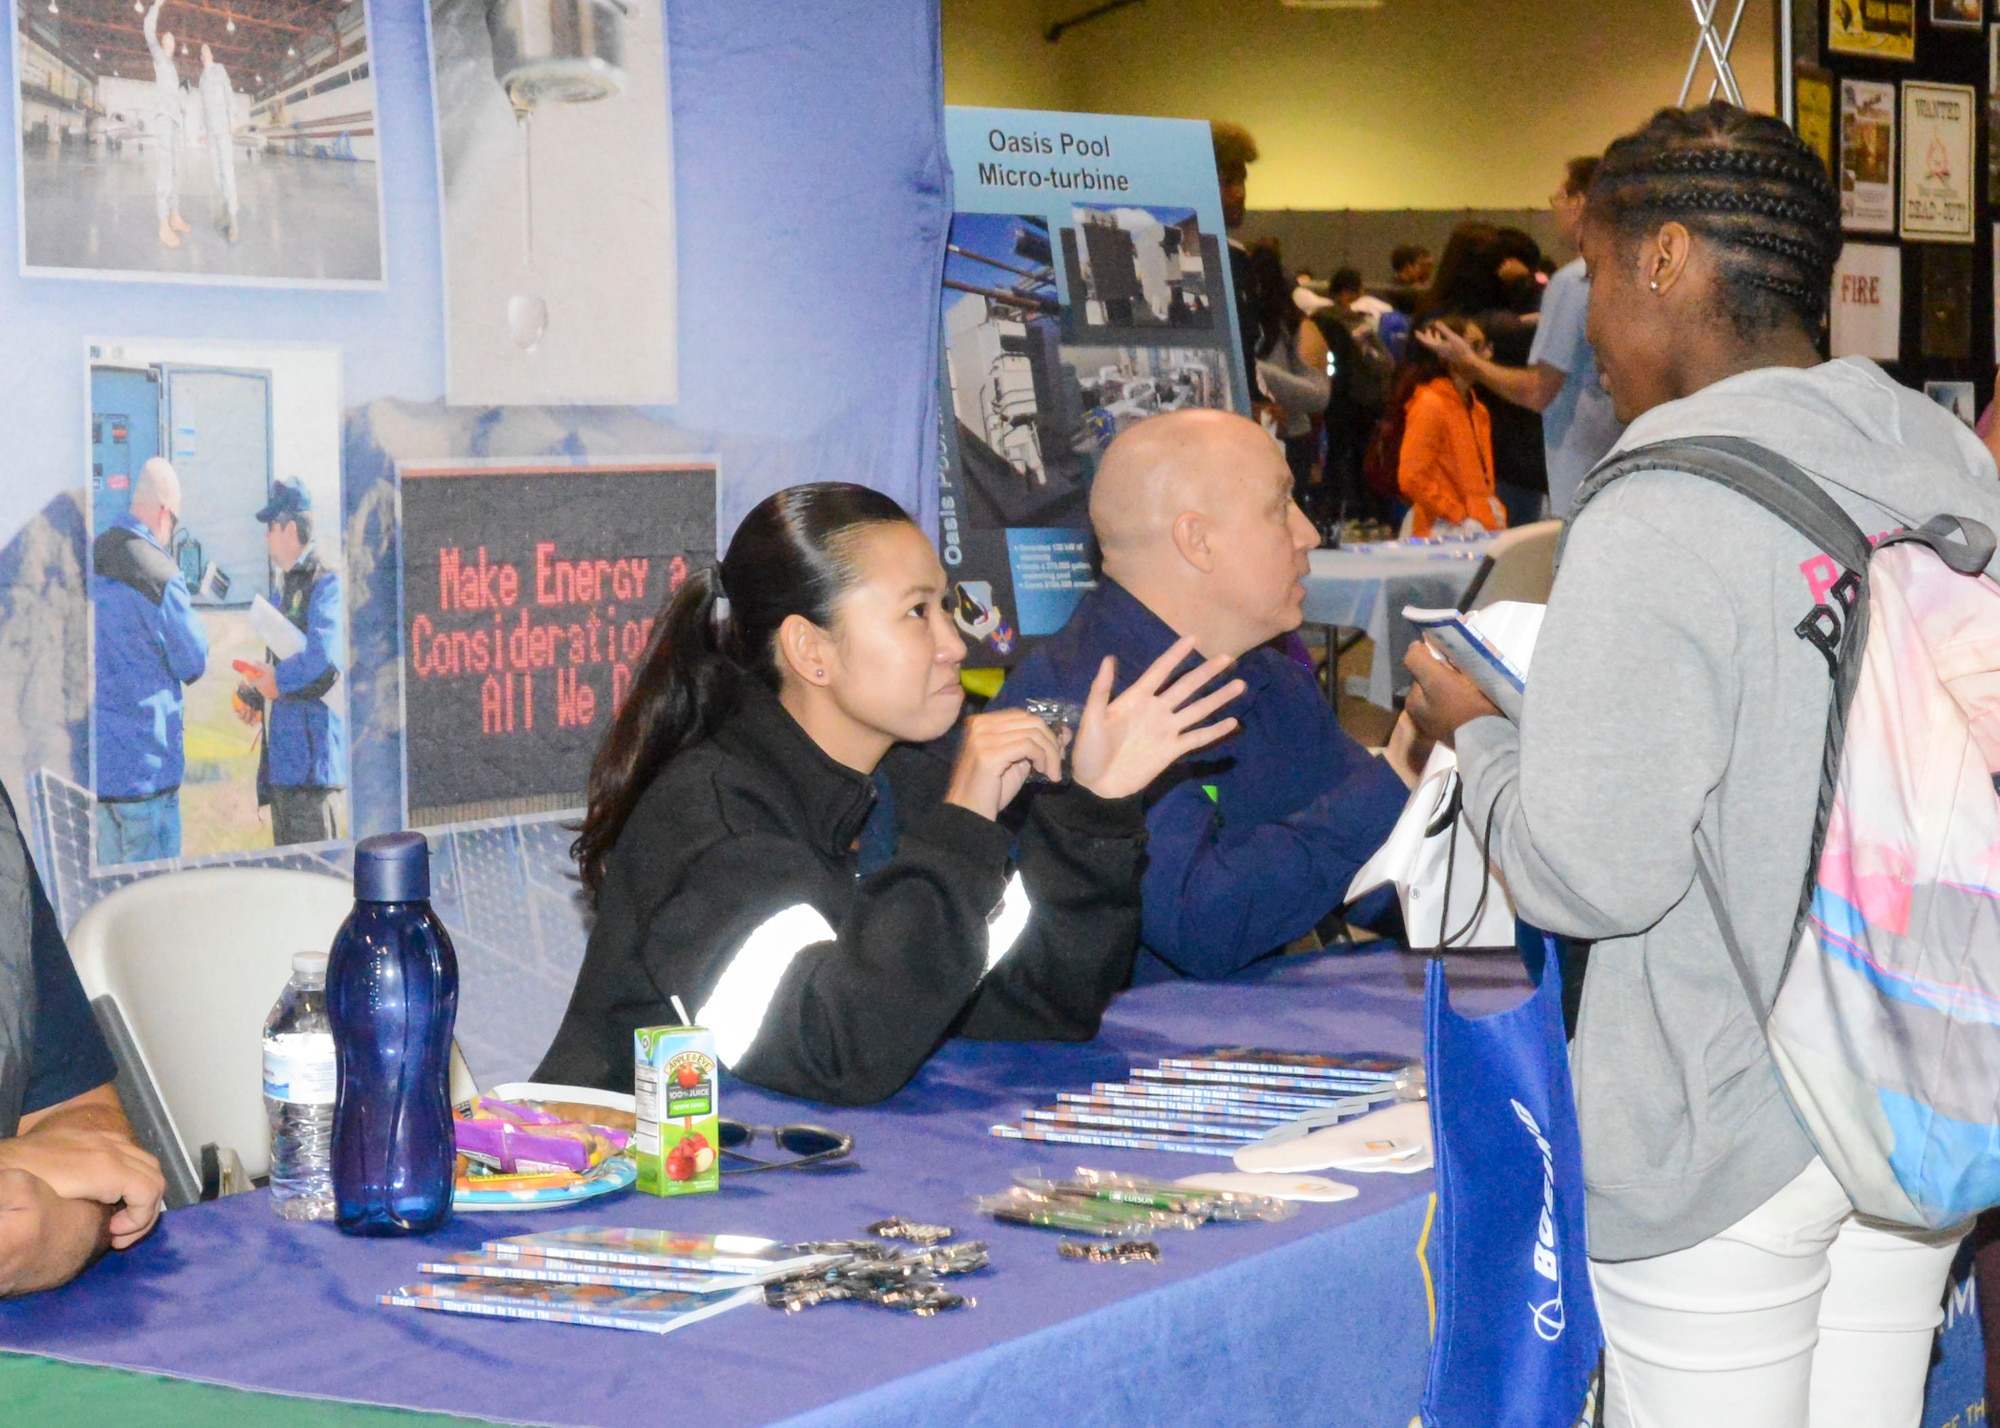 Ashley Vu, an engineer with 412th Civil Engineer Group at Edwards Air Force Base, talks with high school students about her job as an engineer during the 27th annual Salute to Youth career fair at the Antelope Valley Fair and Event Center in Lancaster, California, Oct. 11. (U.S. Air Force photo by Giancarlo Casem)